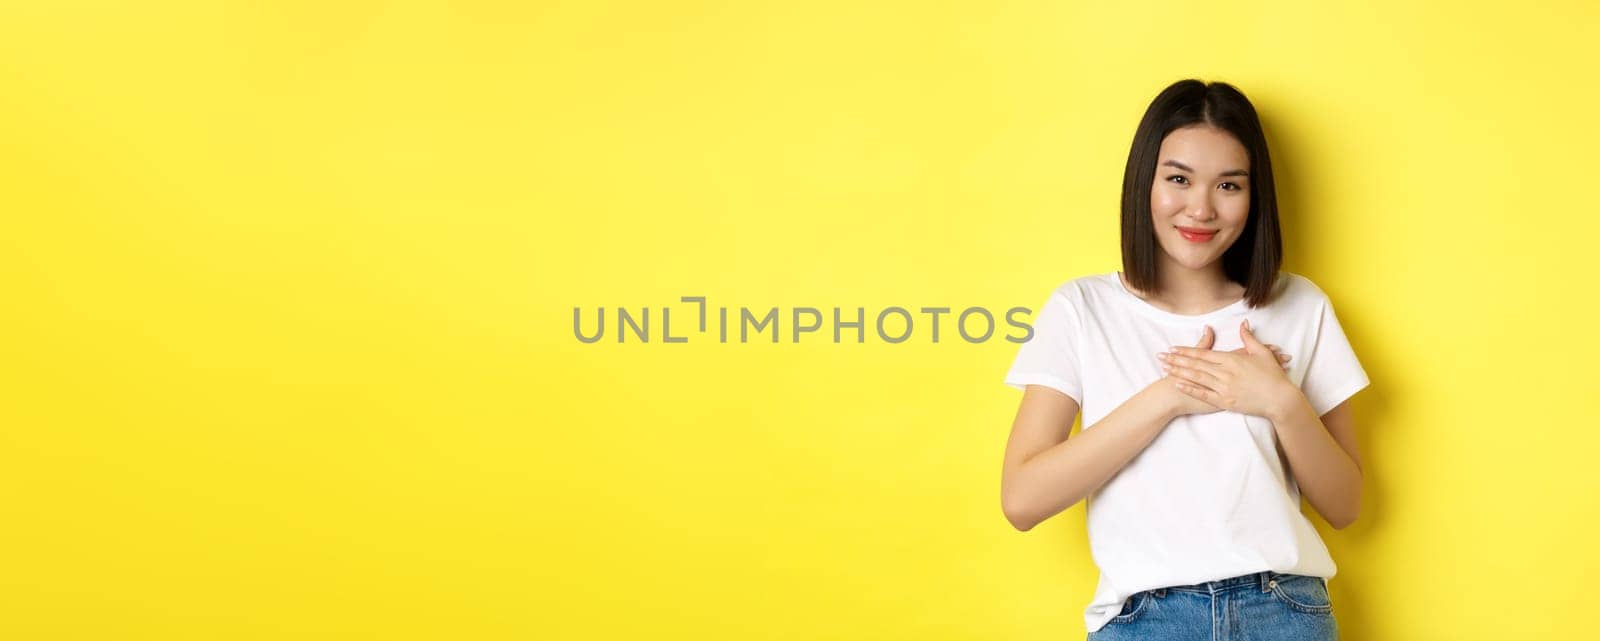 Beauty and fashion concept. Heartfelt asian girl holding hands on heart and smiling touched, thanking you, standing over yellow background.